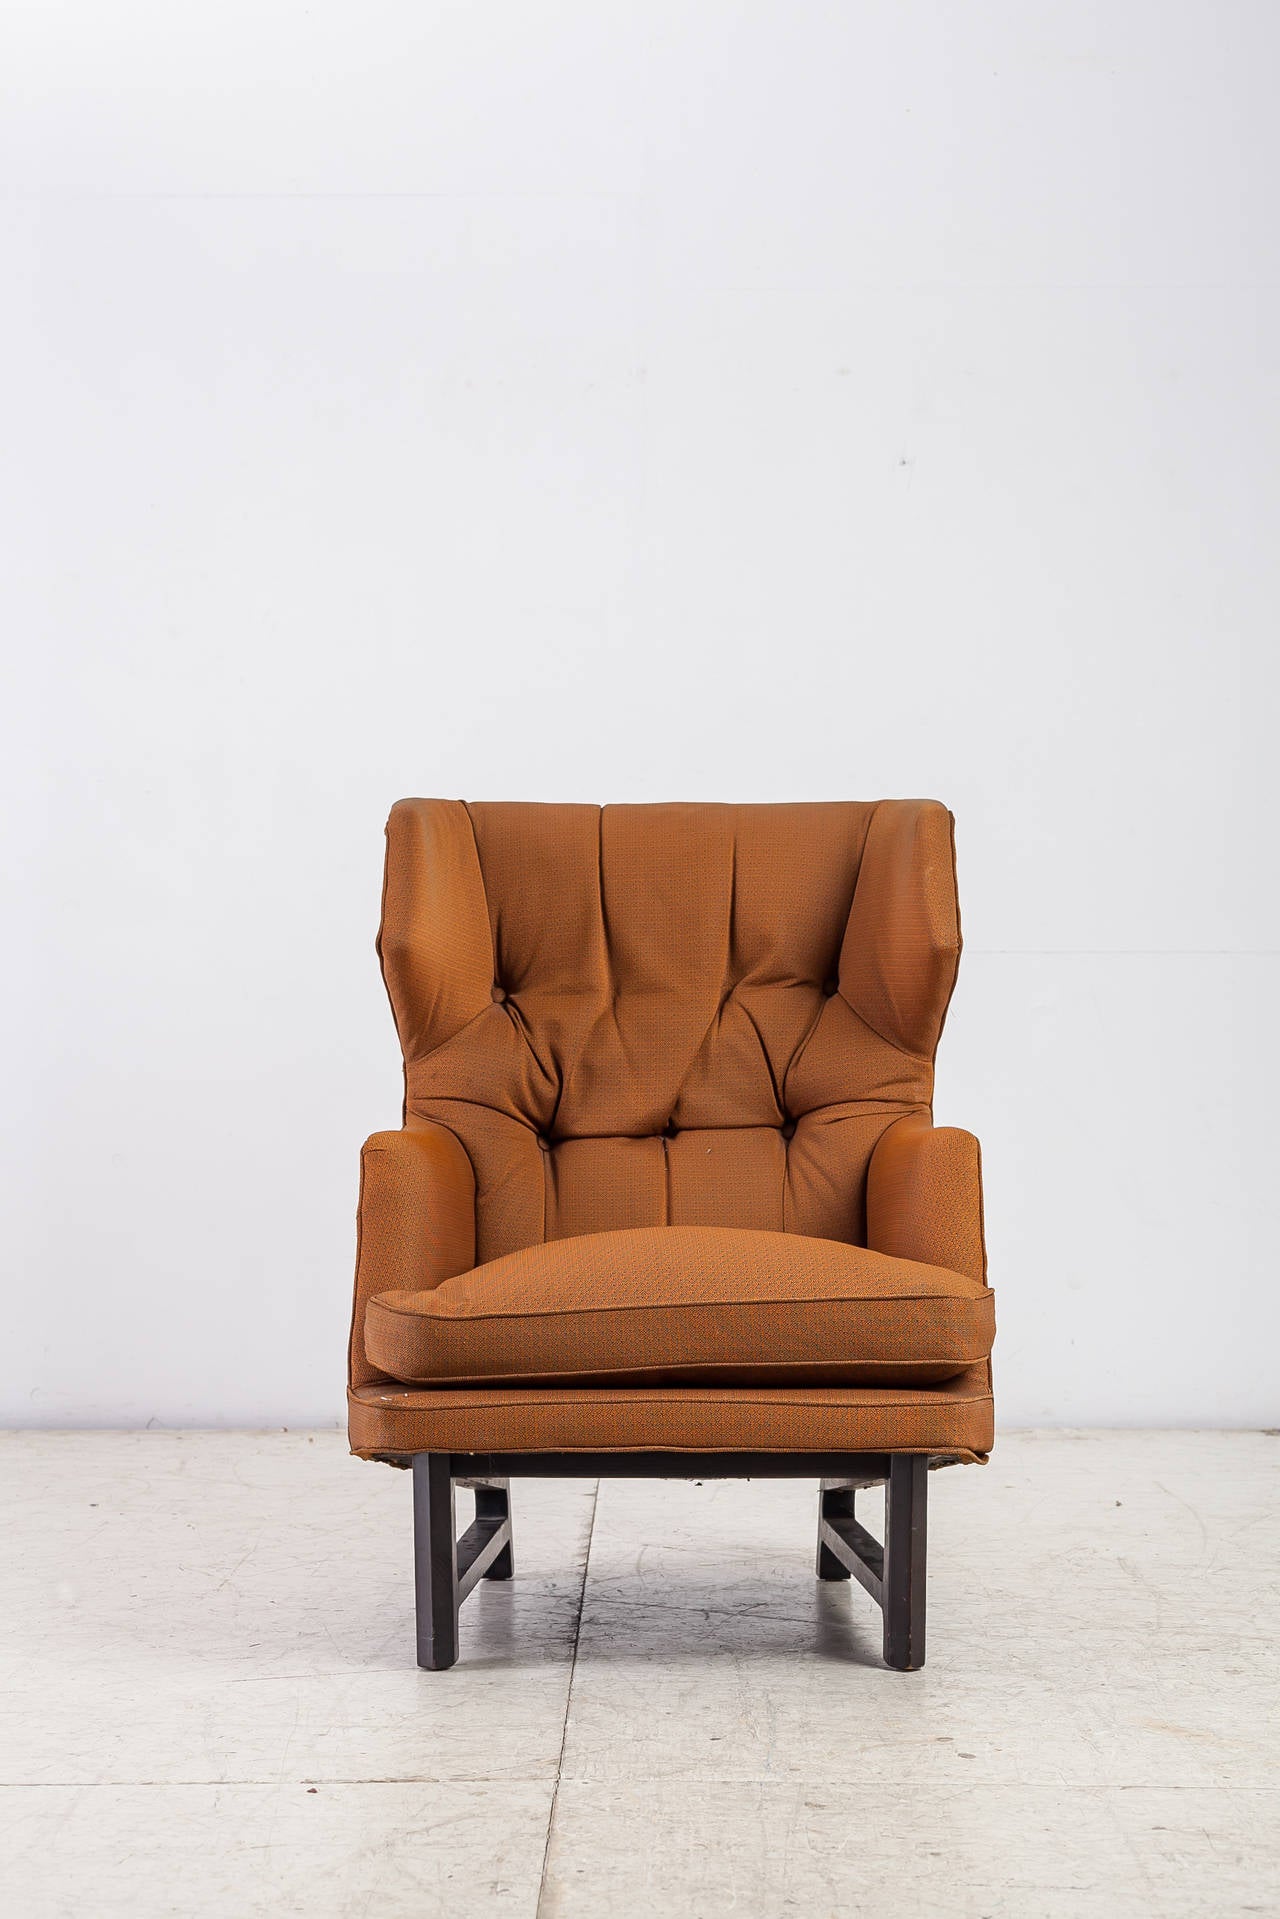 Edward Wormley Janus Wingback Lounge Chair for Dunbar In Good Condition For Sale In Maastricht, NL